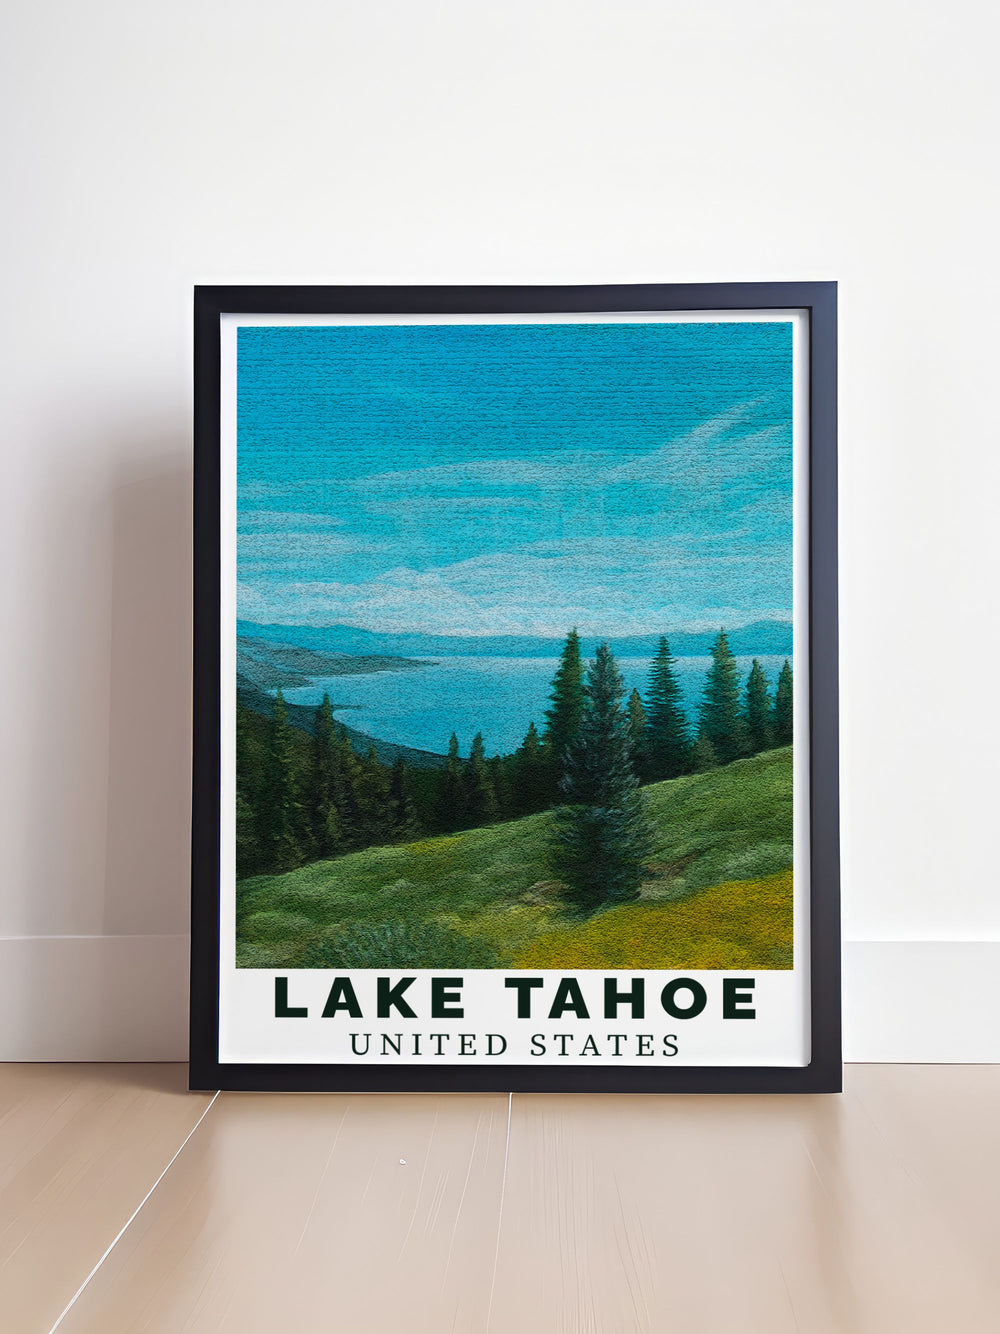 Enhance your living room with a Lake Tahoe Art Print showcasing the serene and picturesque scenery in stunning Summer Blue hues